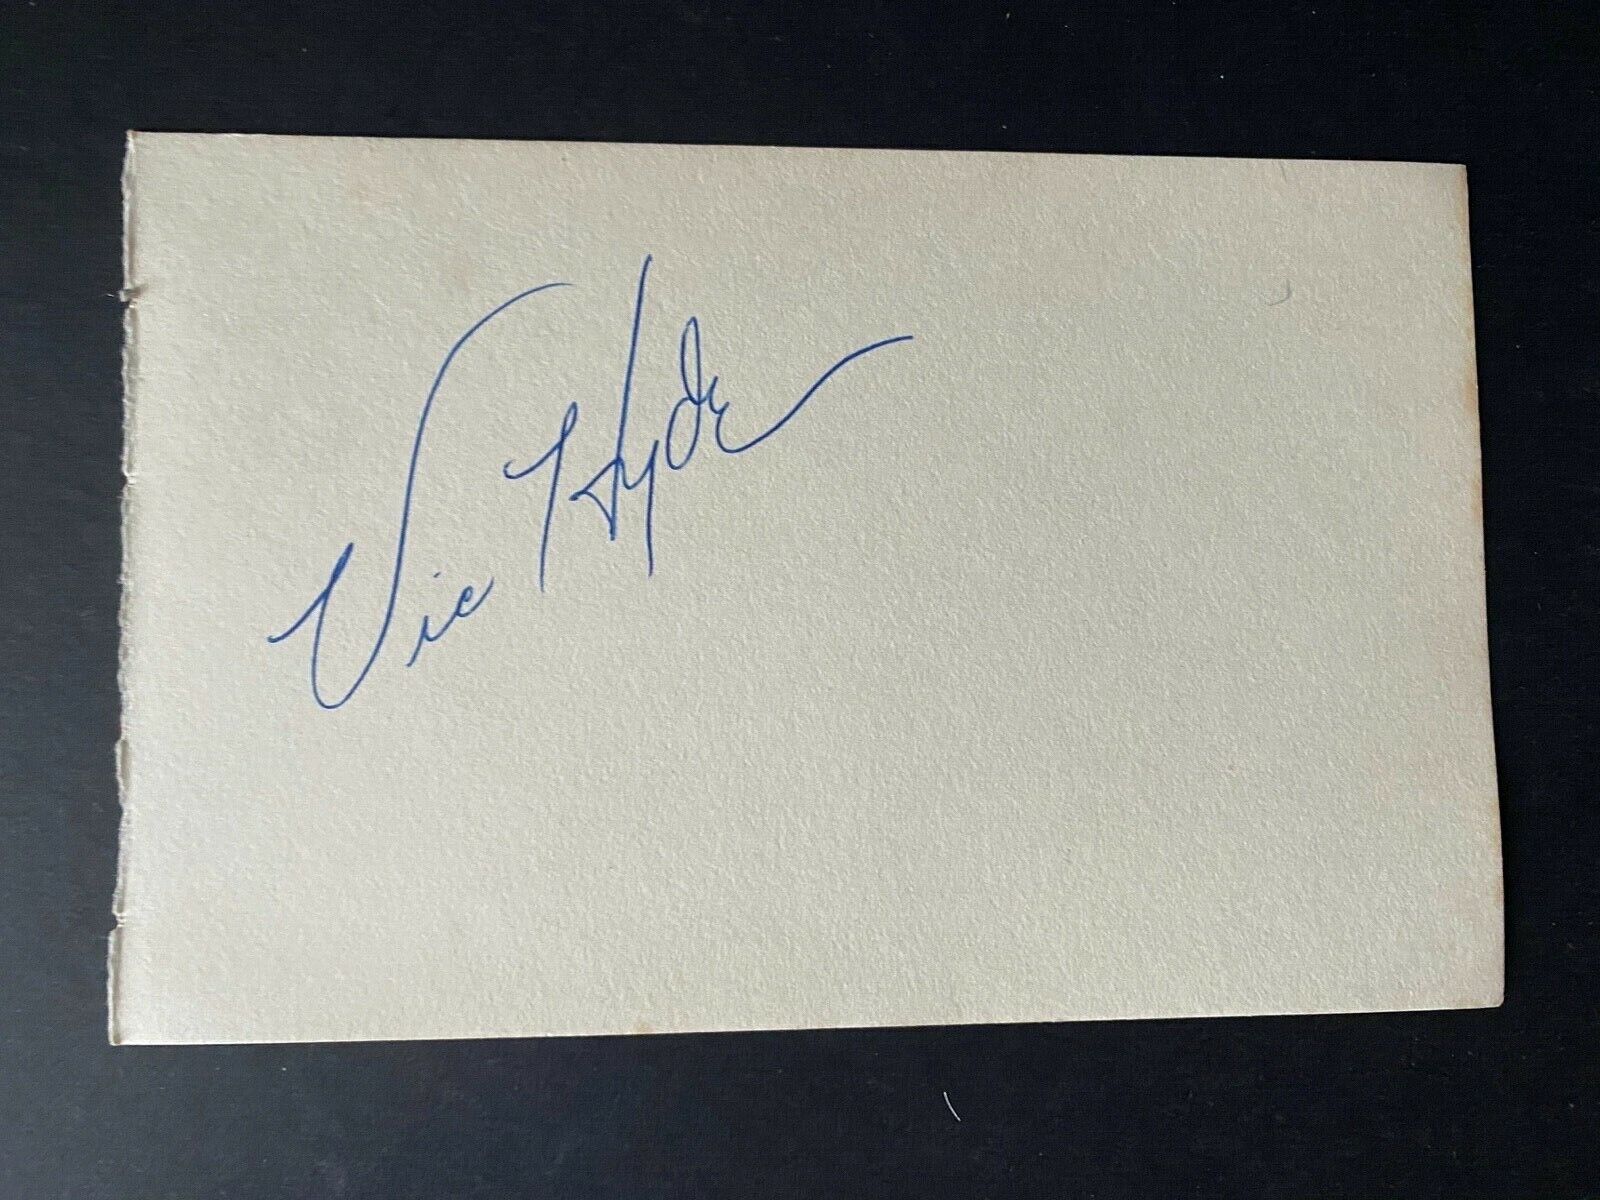 VIC HYDE - AMERICAN BORN MUSICAL ACTOR - SIGNED ALBUM PAGE